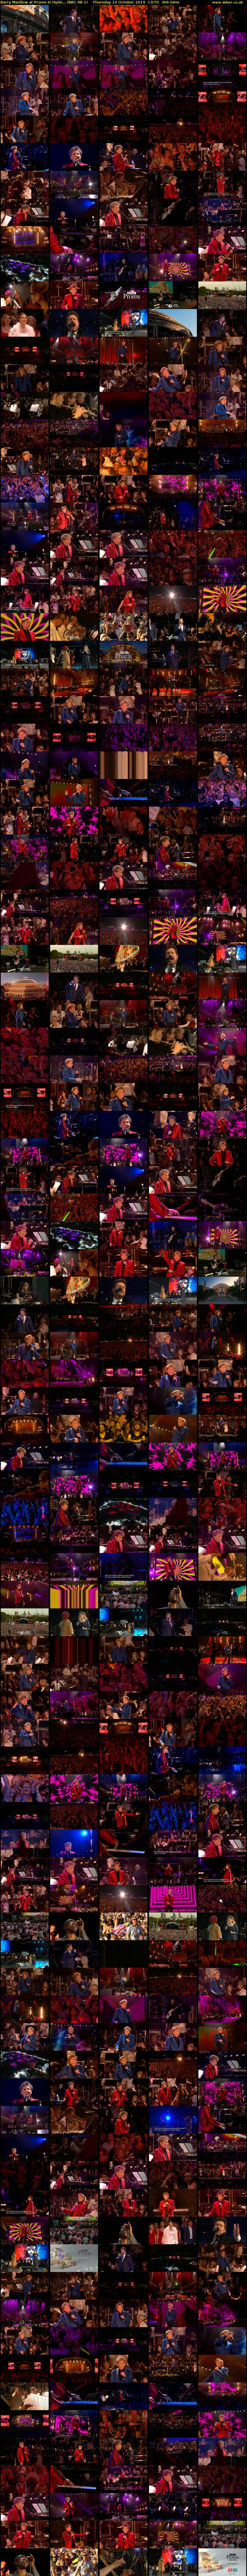 Barry Manilow at Proms in Hyde... (BBC RB 1) Thursday 10 October 2019 13:55 - 19:01